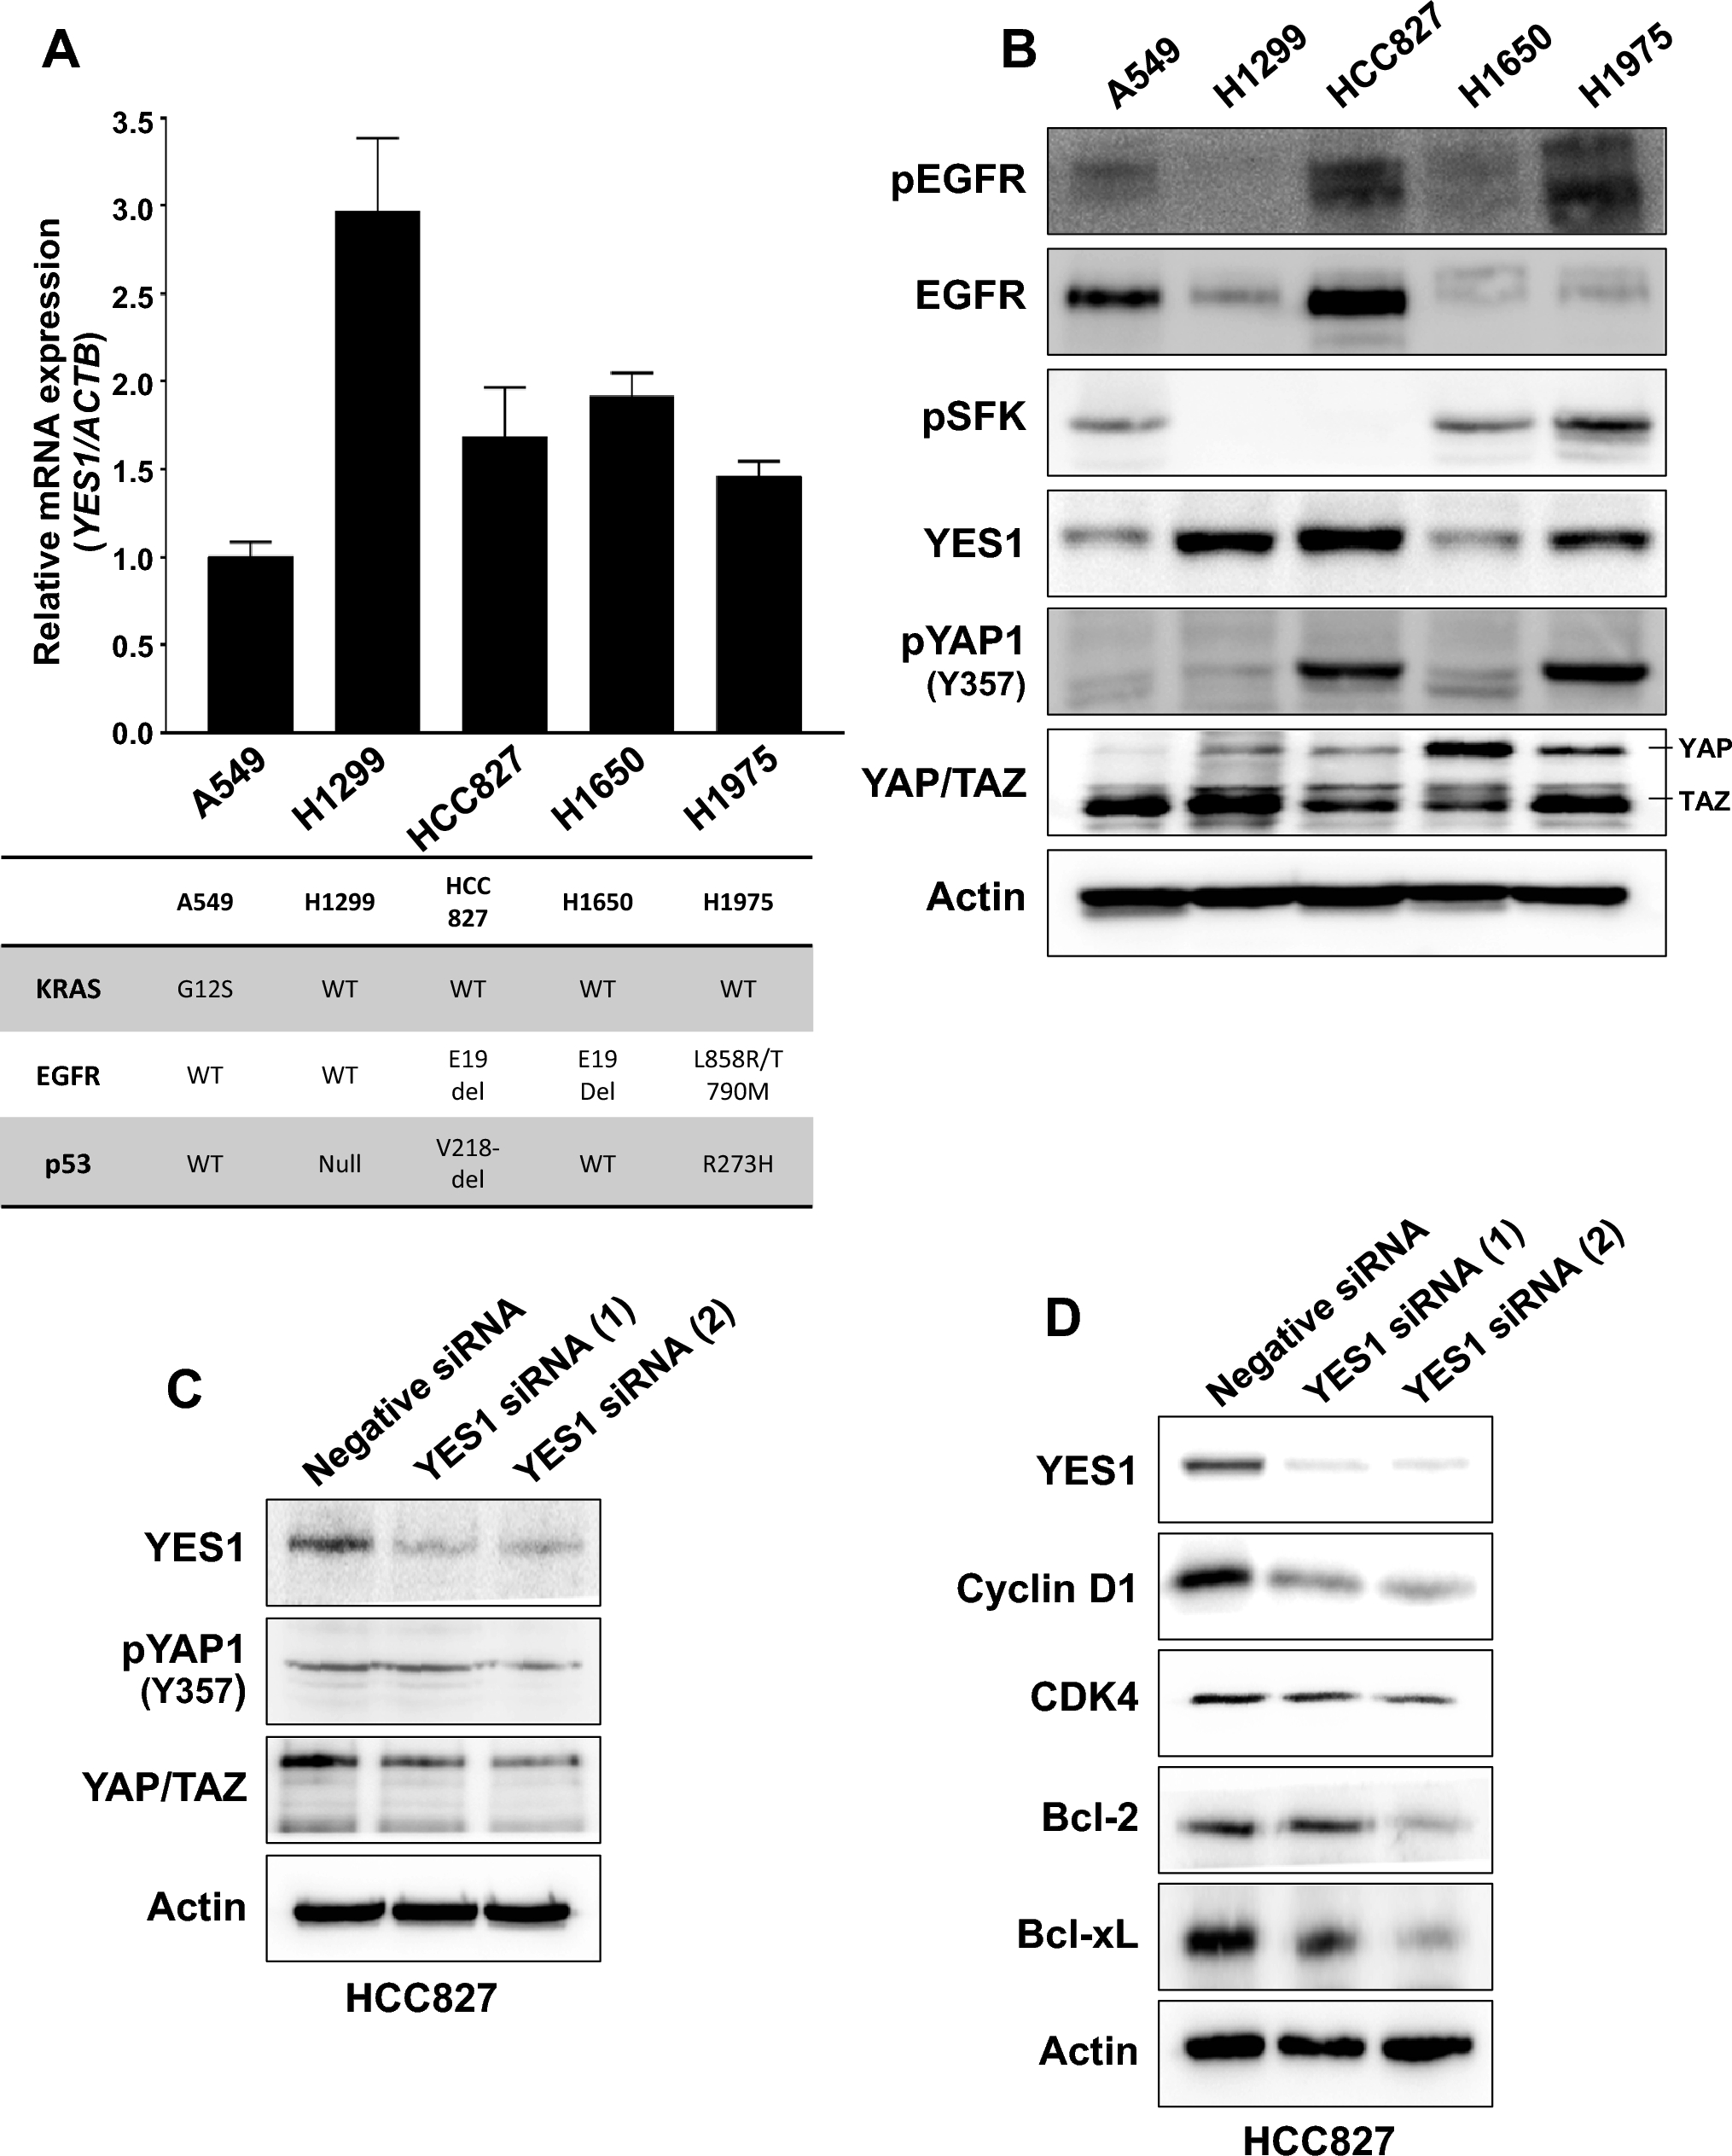 YES1 as a potential target to overcome drug resistance in EGFR-deregulated non-small cell lung cancer